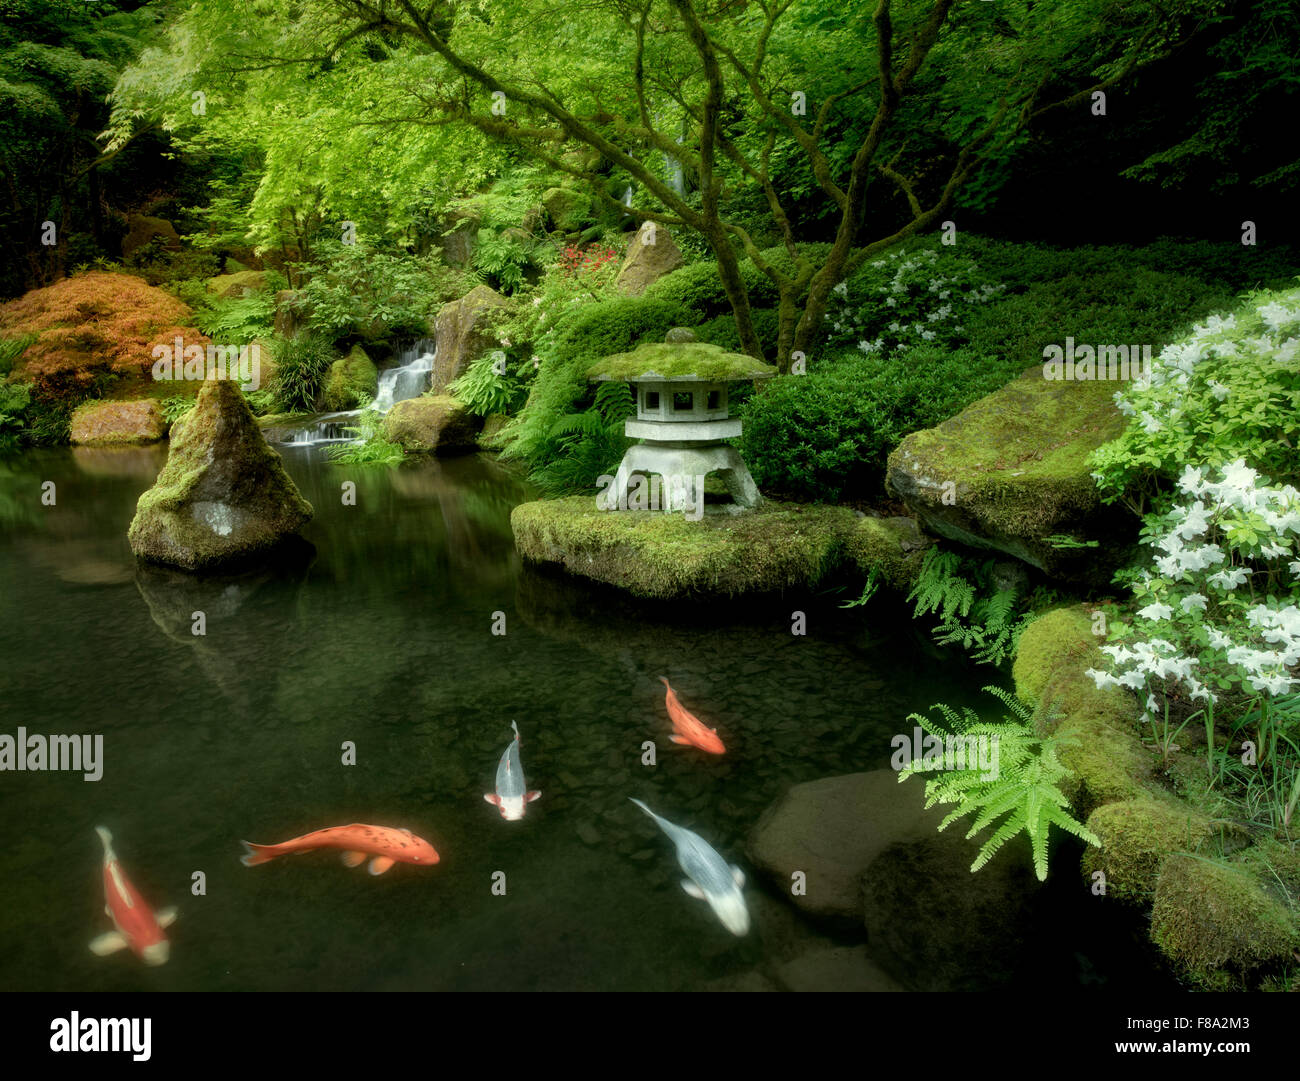 Pond in Japan stock photo. Image of deep, nature, japan - 182546932